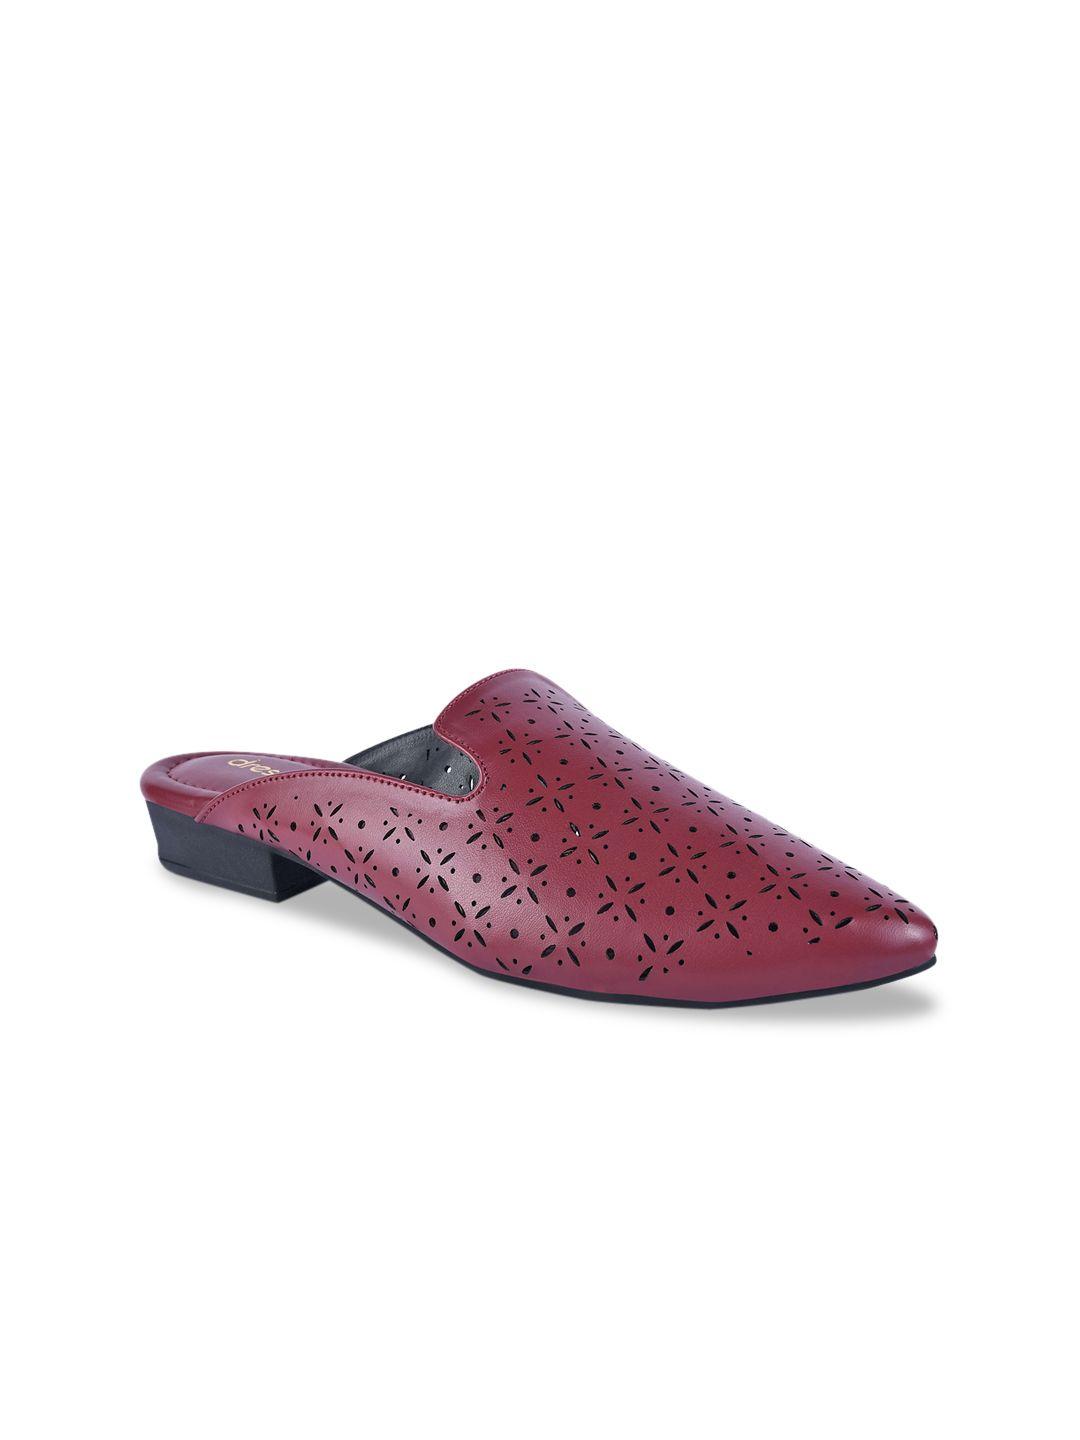 dressberry women maroon textured mules with laser cuts flats